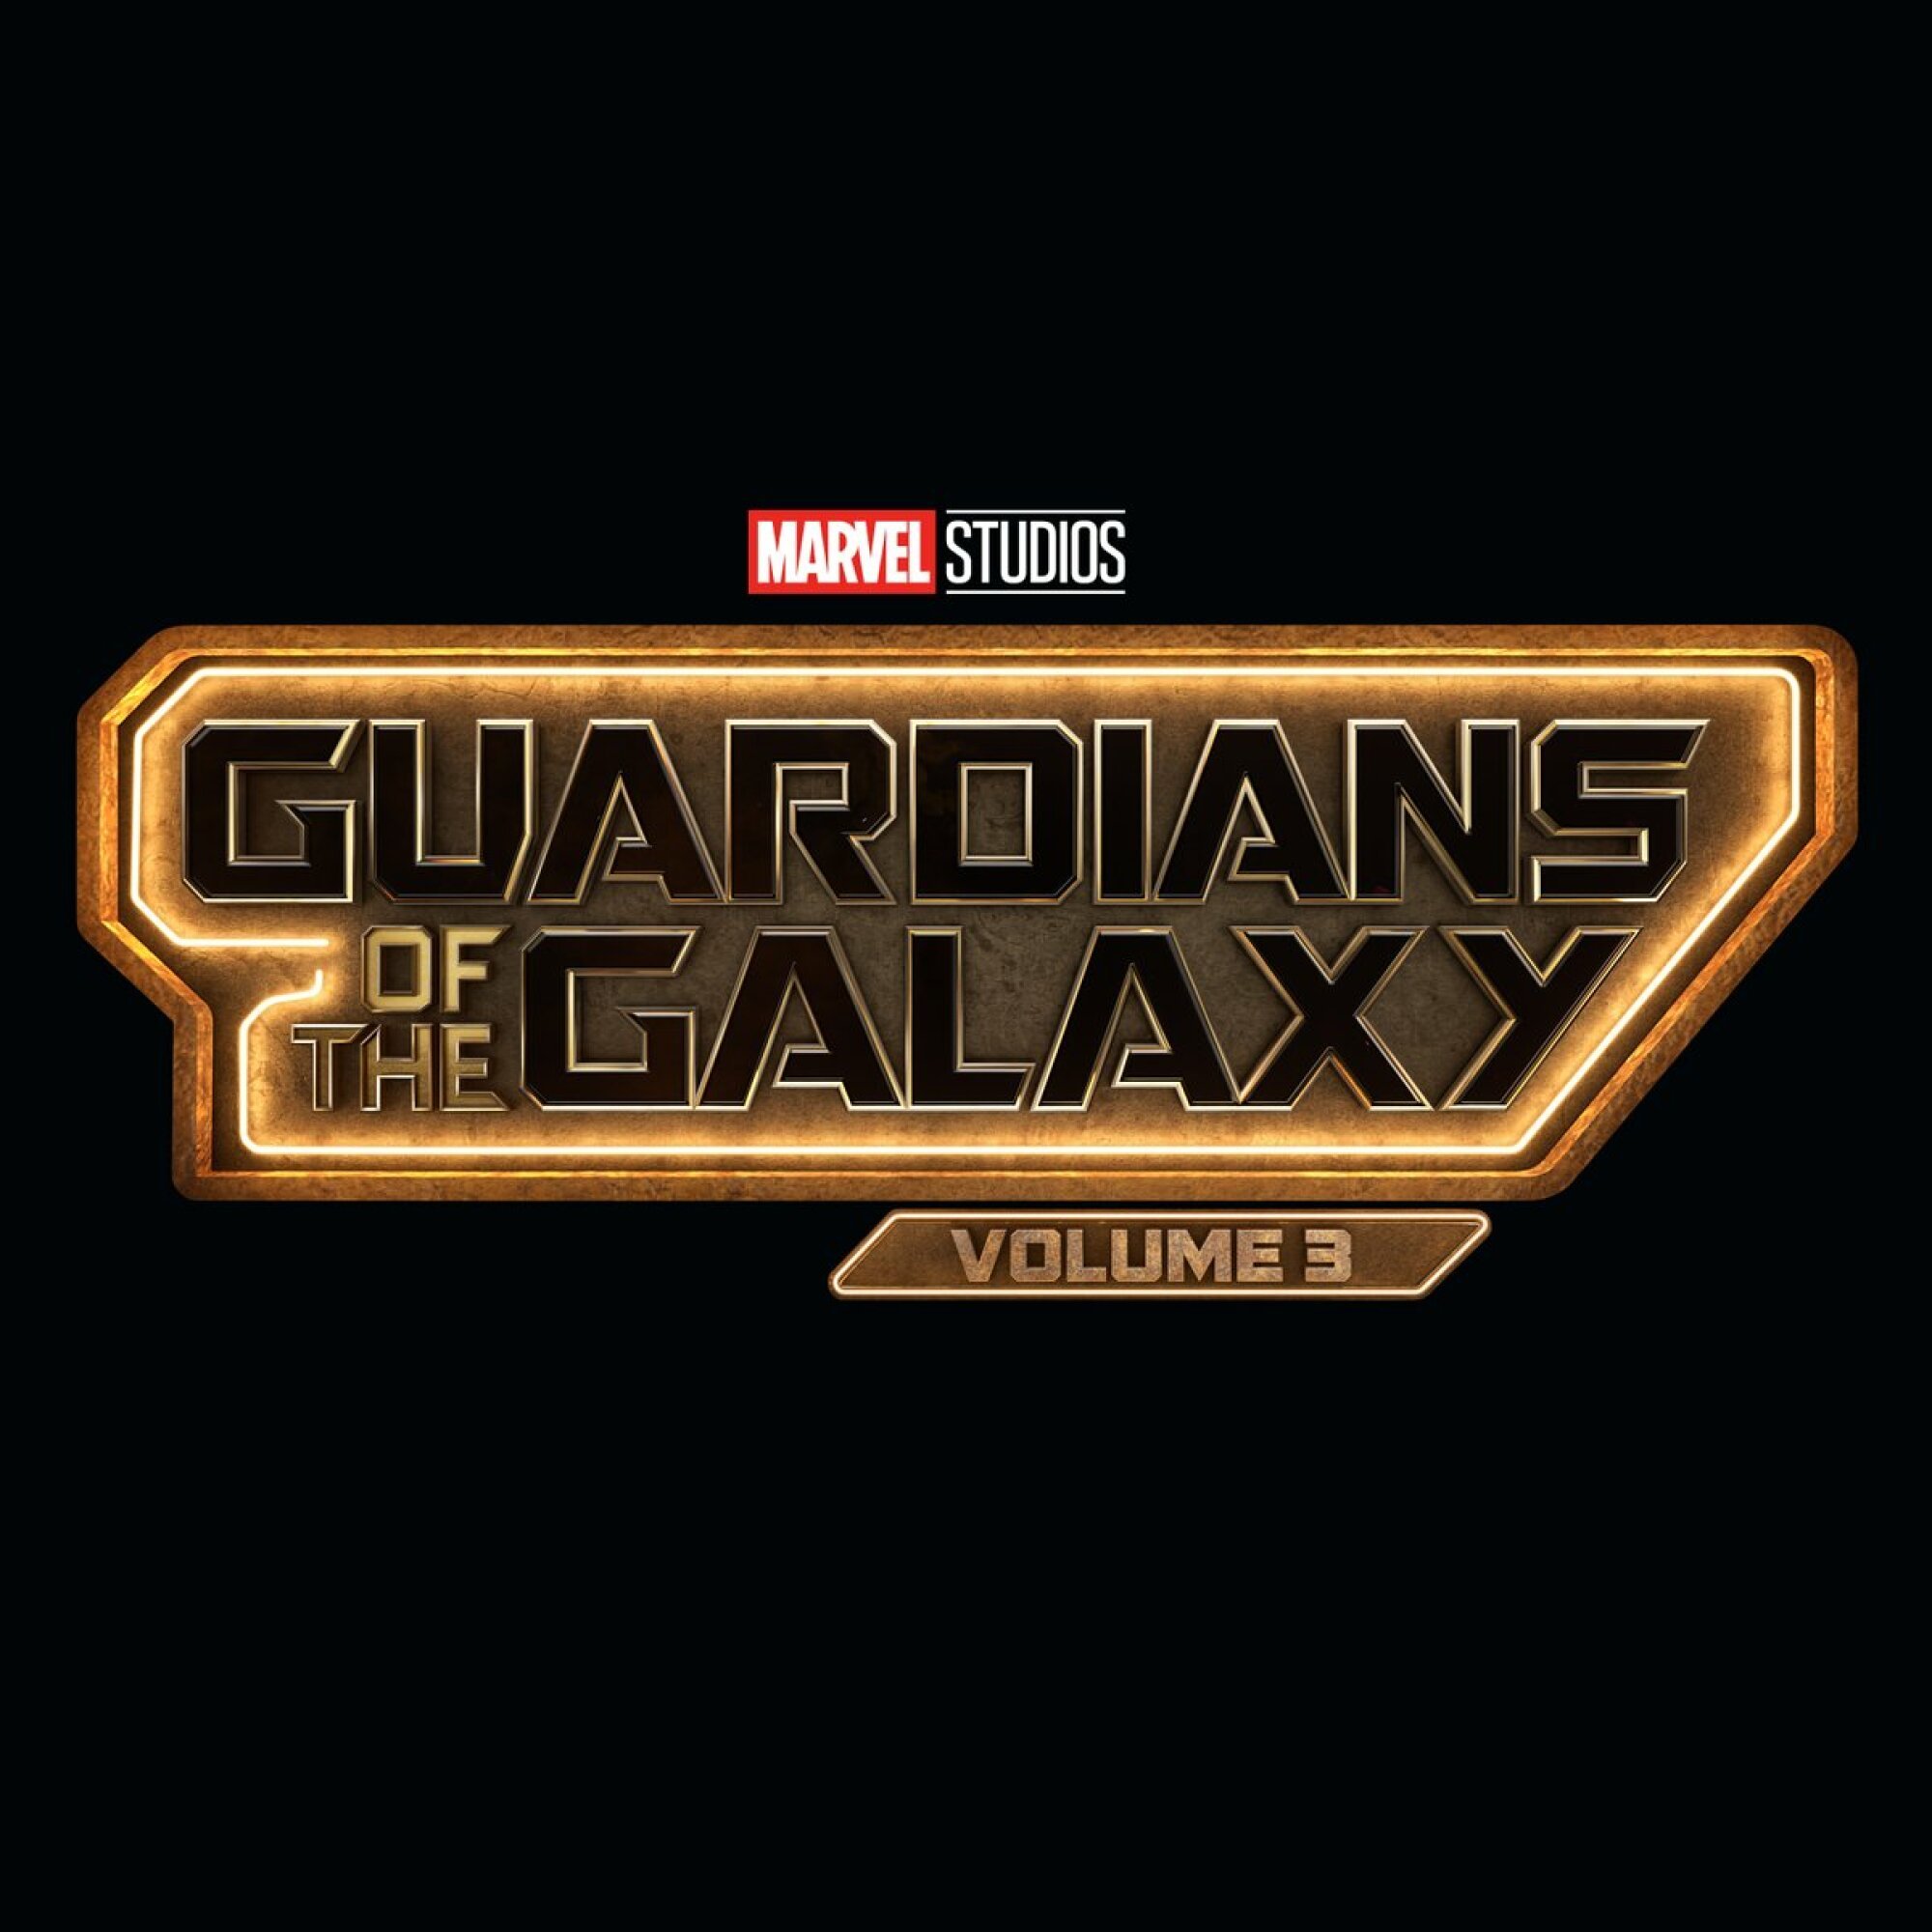 Guardians of the Galaxy Vol. 3 titlecard